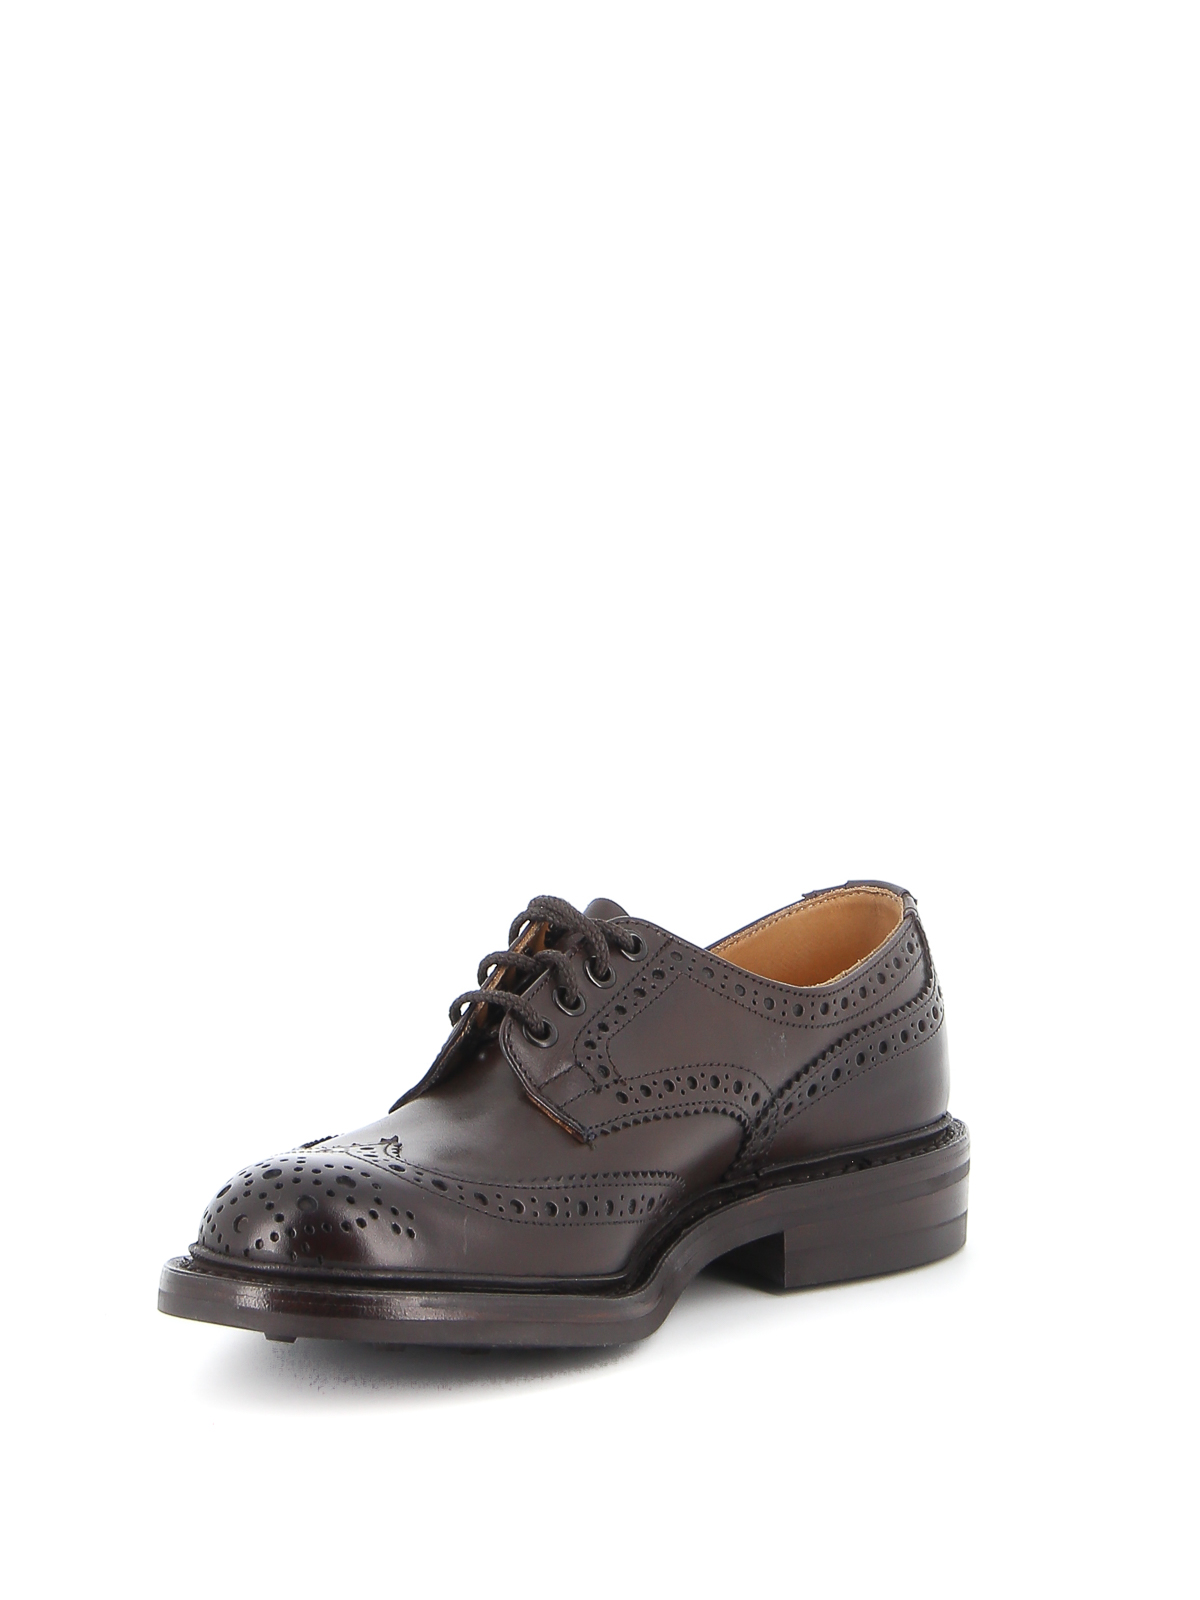 trickers black friday